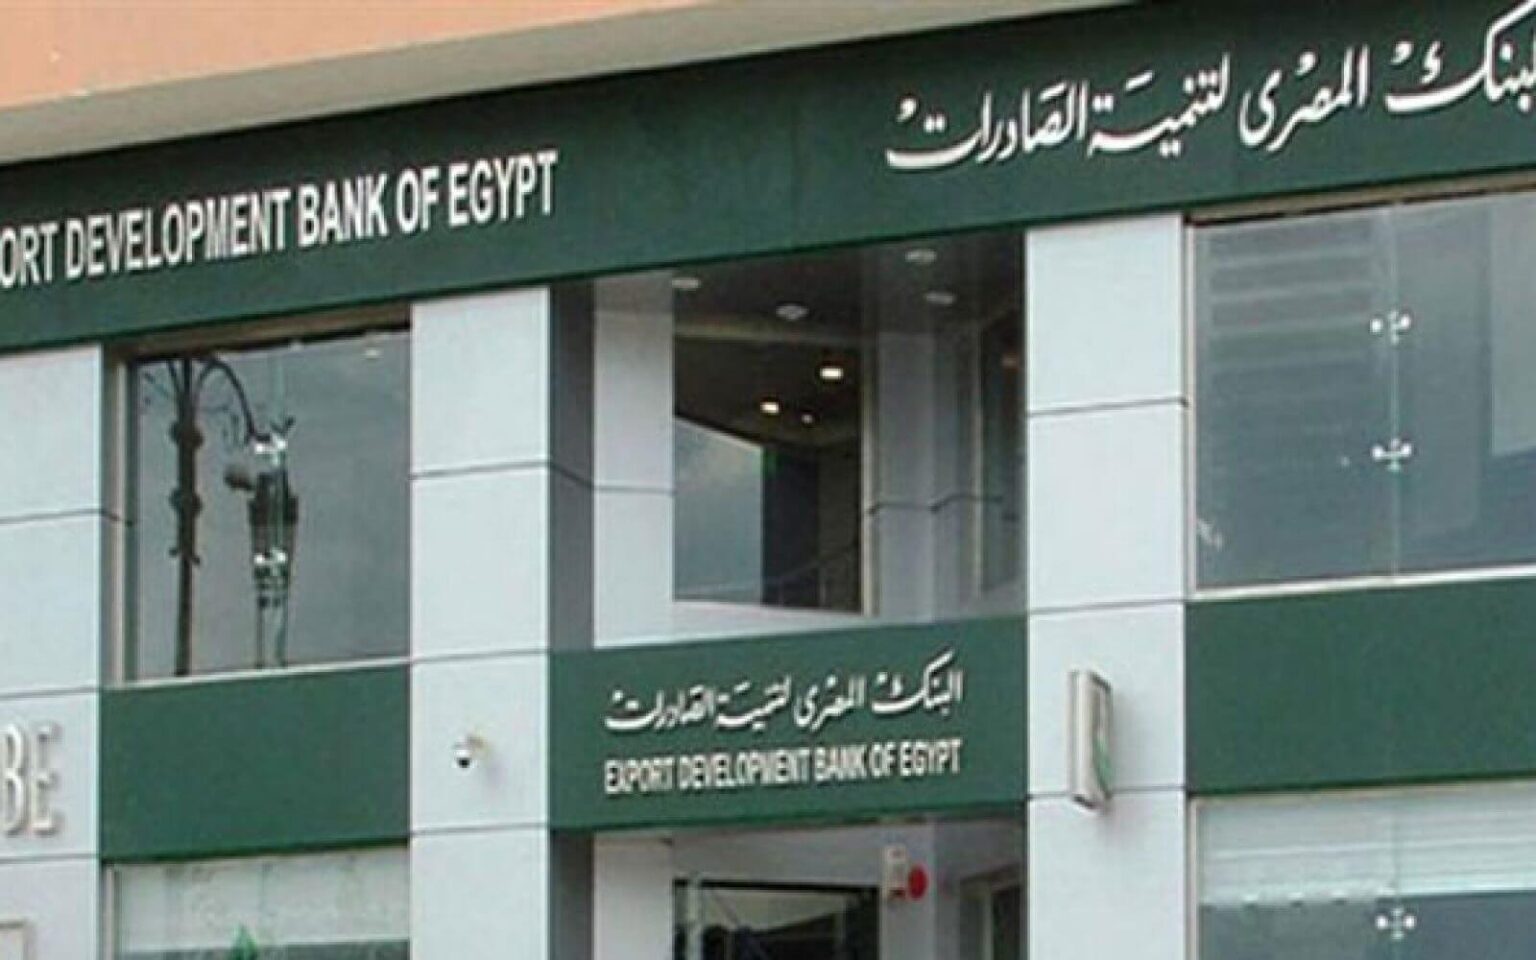 Egypt’s EBE Board of Directors said it approved increasing its issued and paid-up capital from 2.7 to 3.3 billion pounds